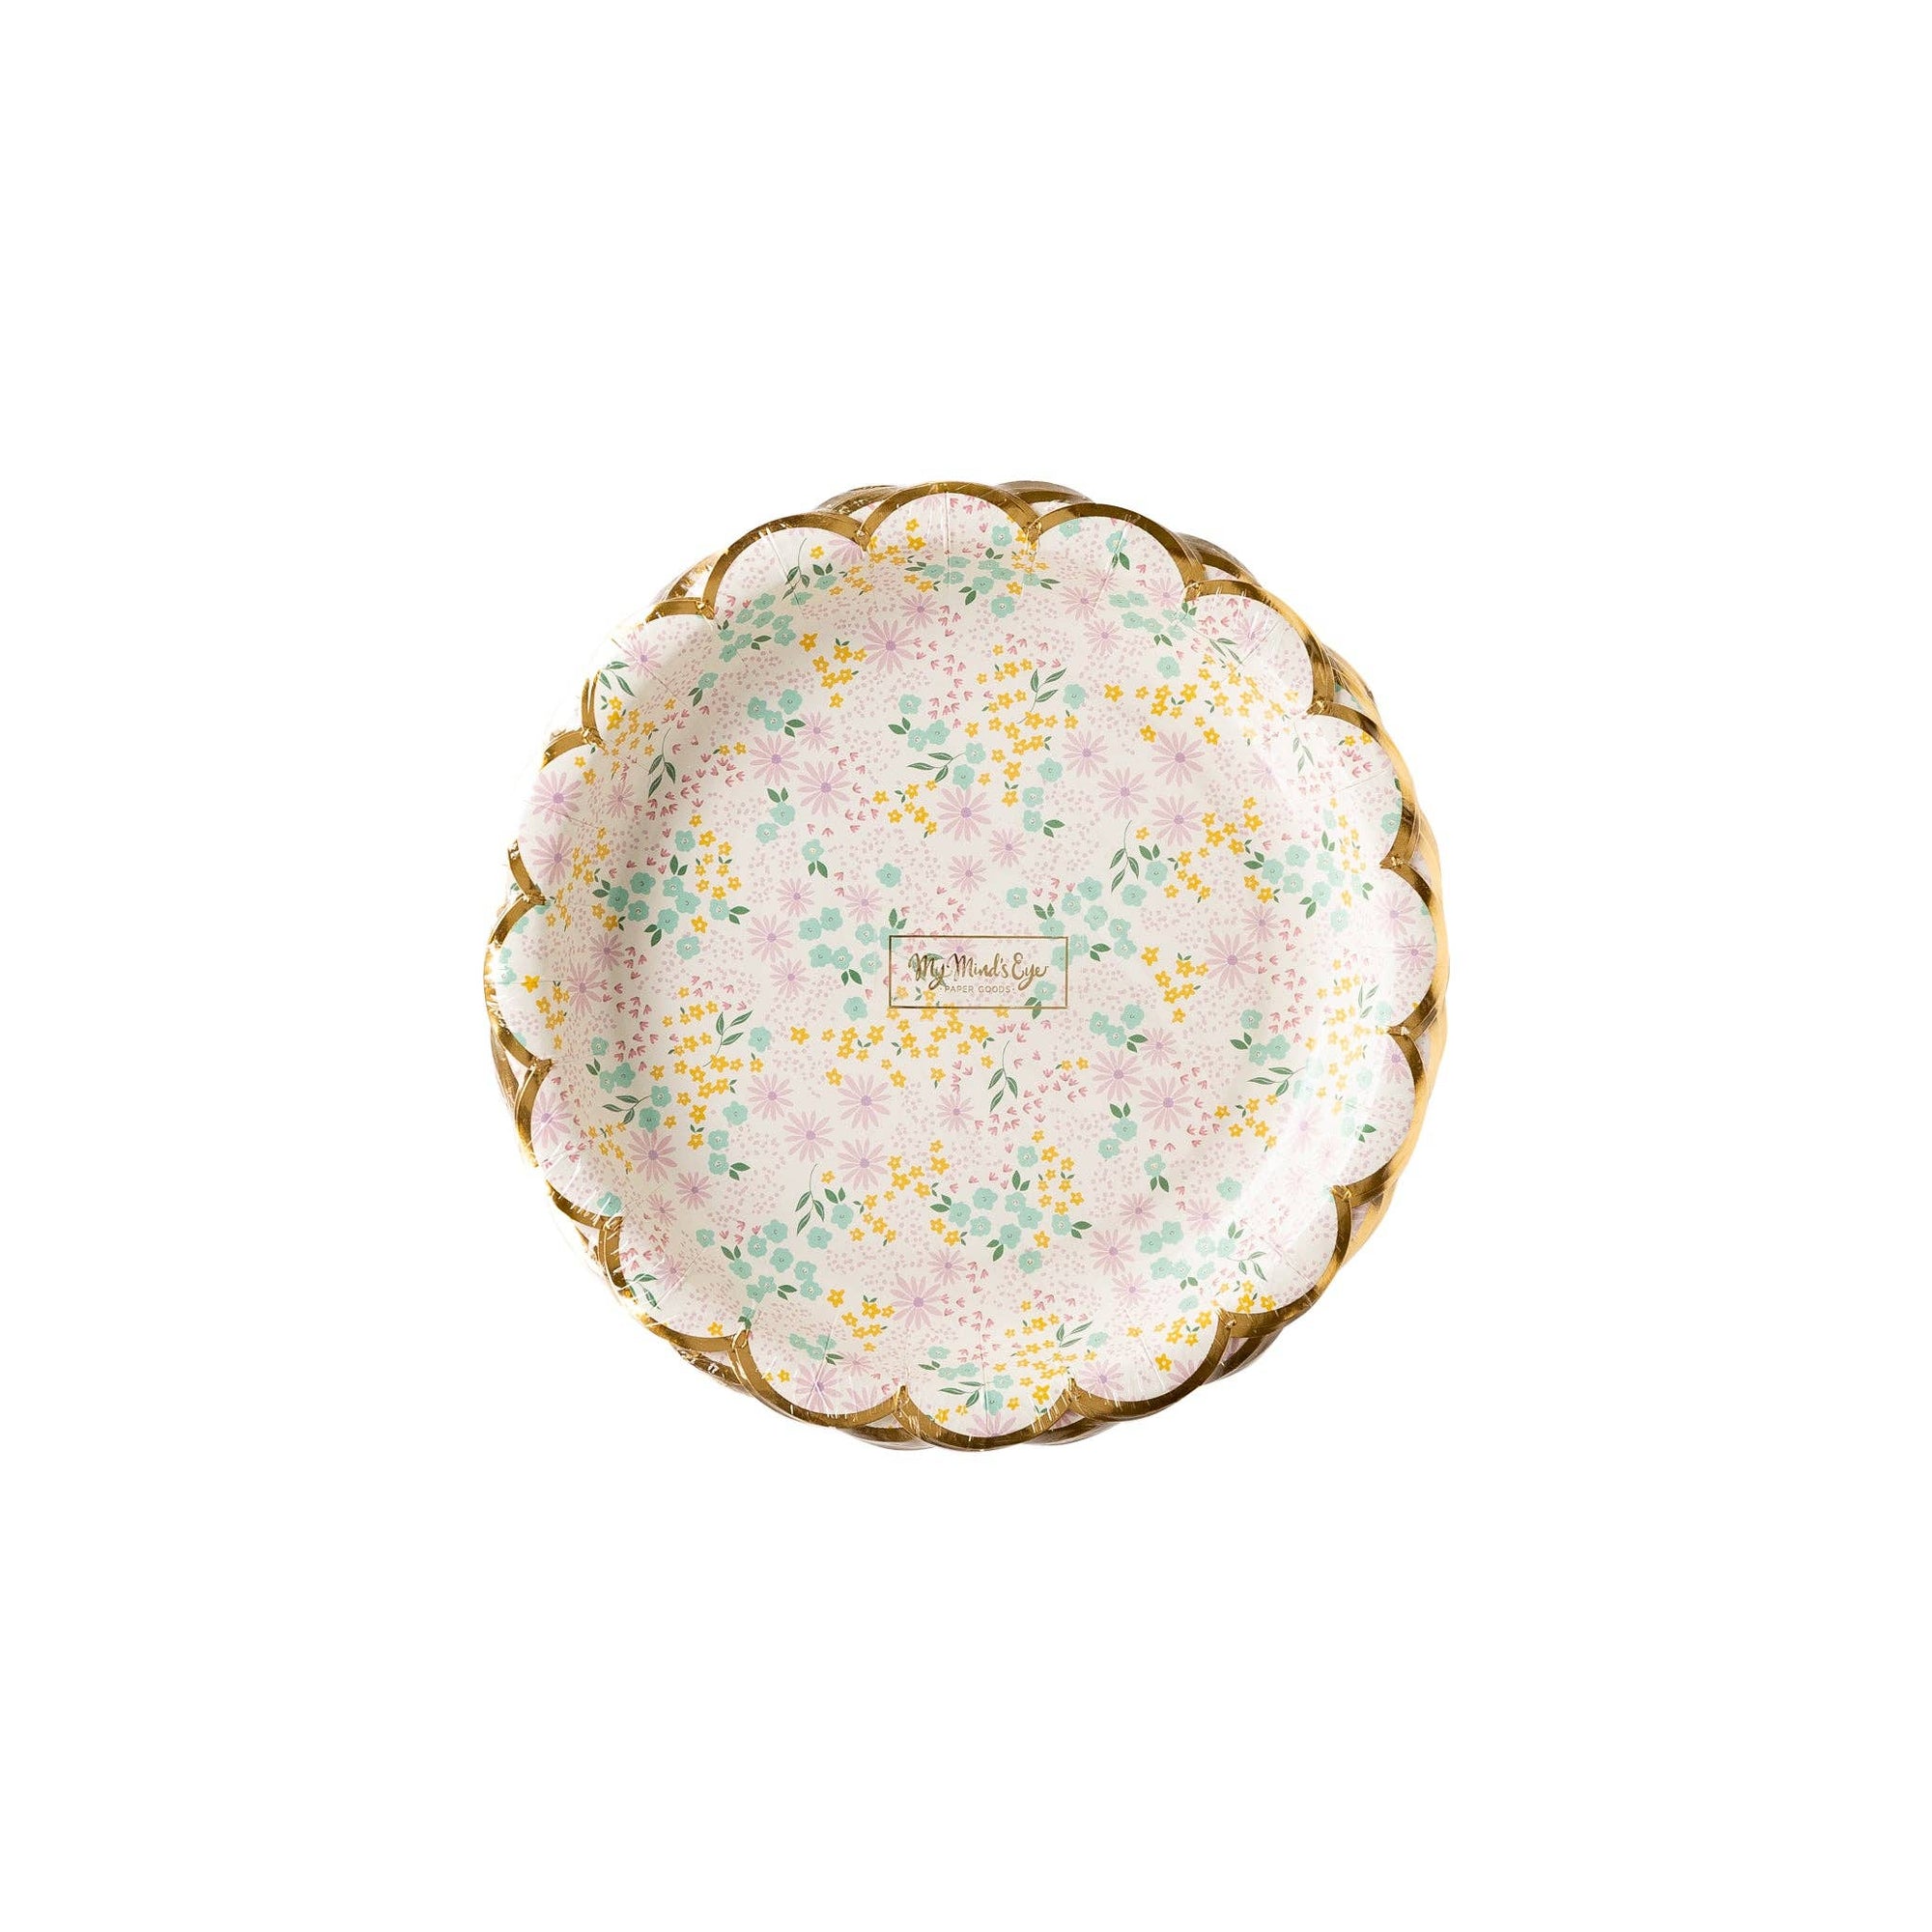 Ditsy Floral Round Scallop 7" Plate - The Preppy Bunny